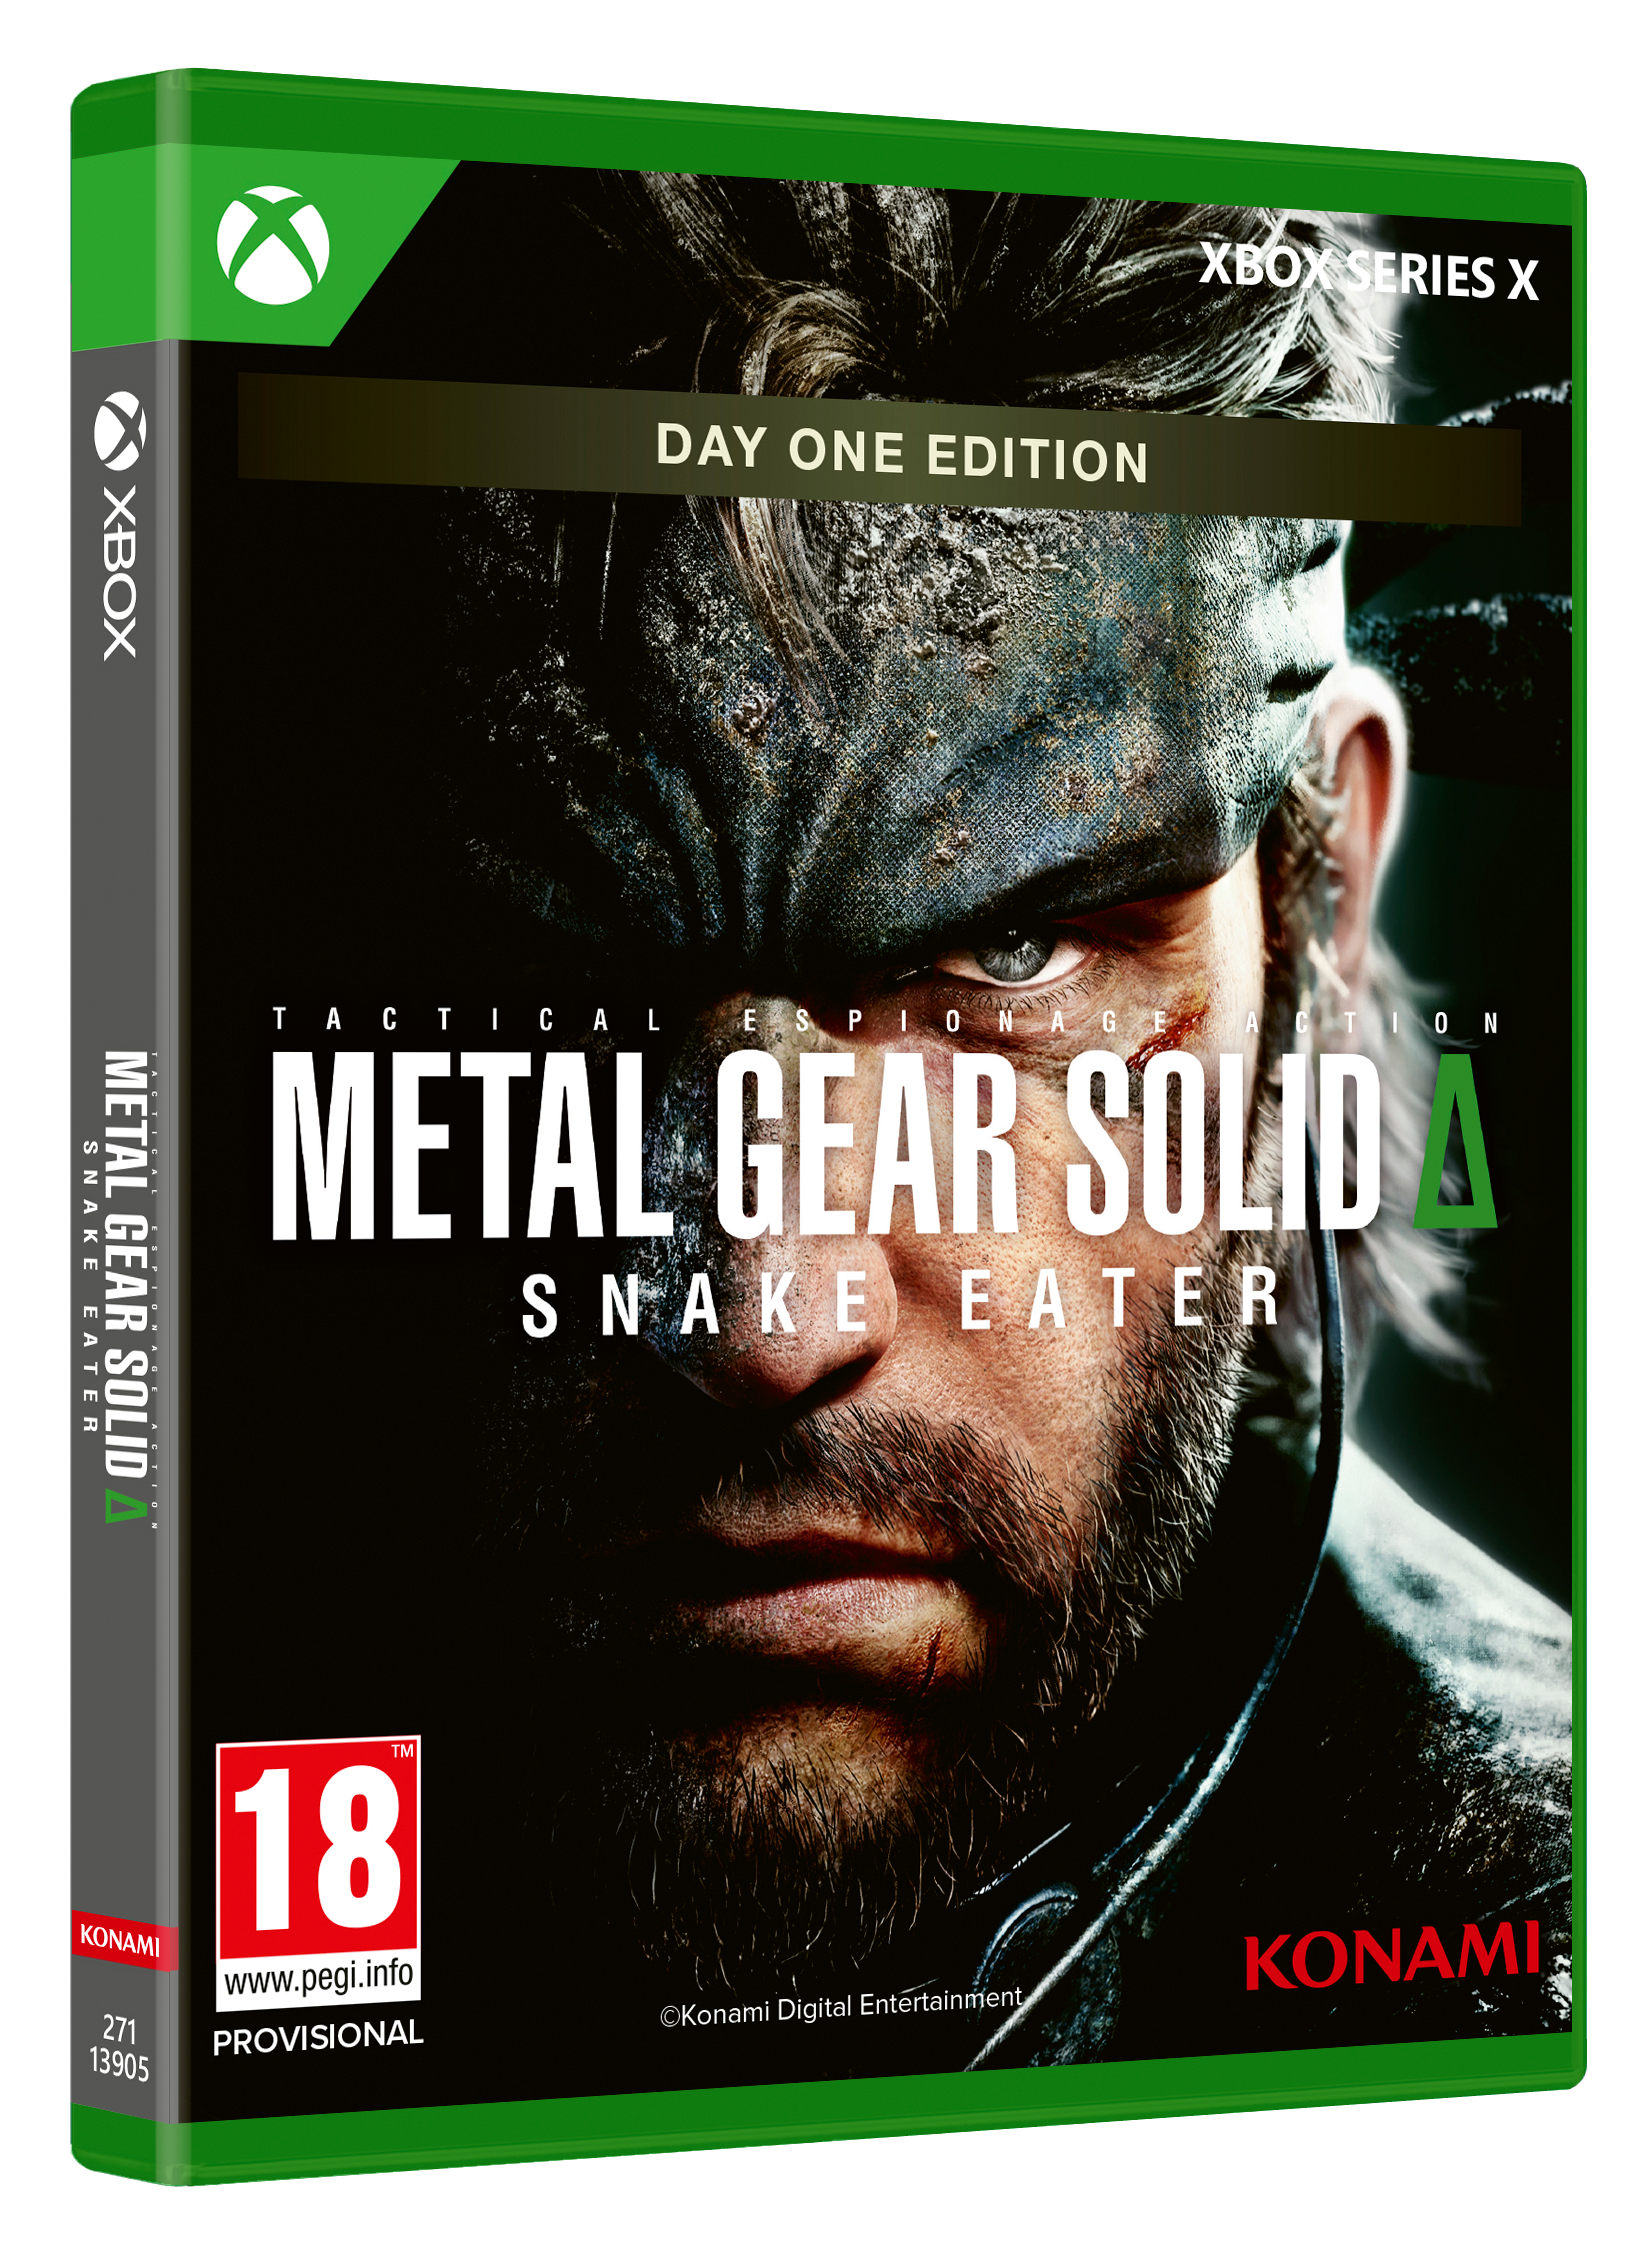 Metal Gear Solid Delta Snake Eater Deluxe Edition Xbox Series